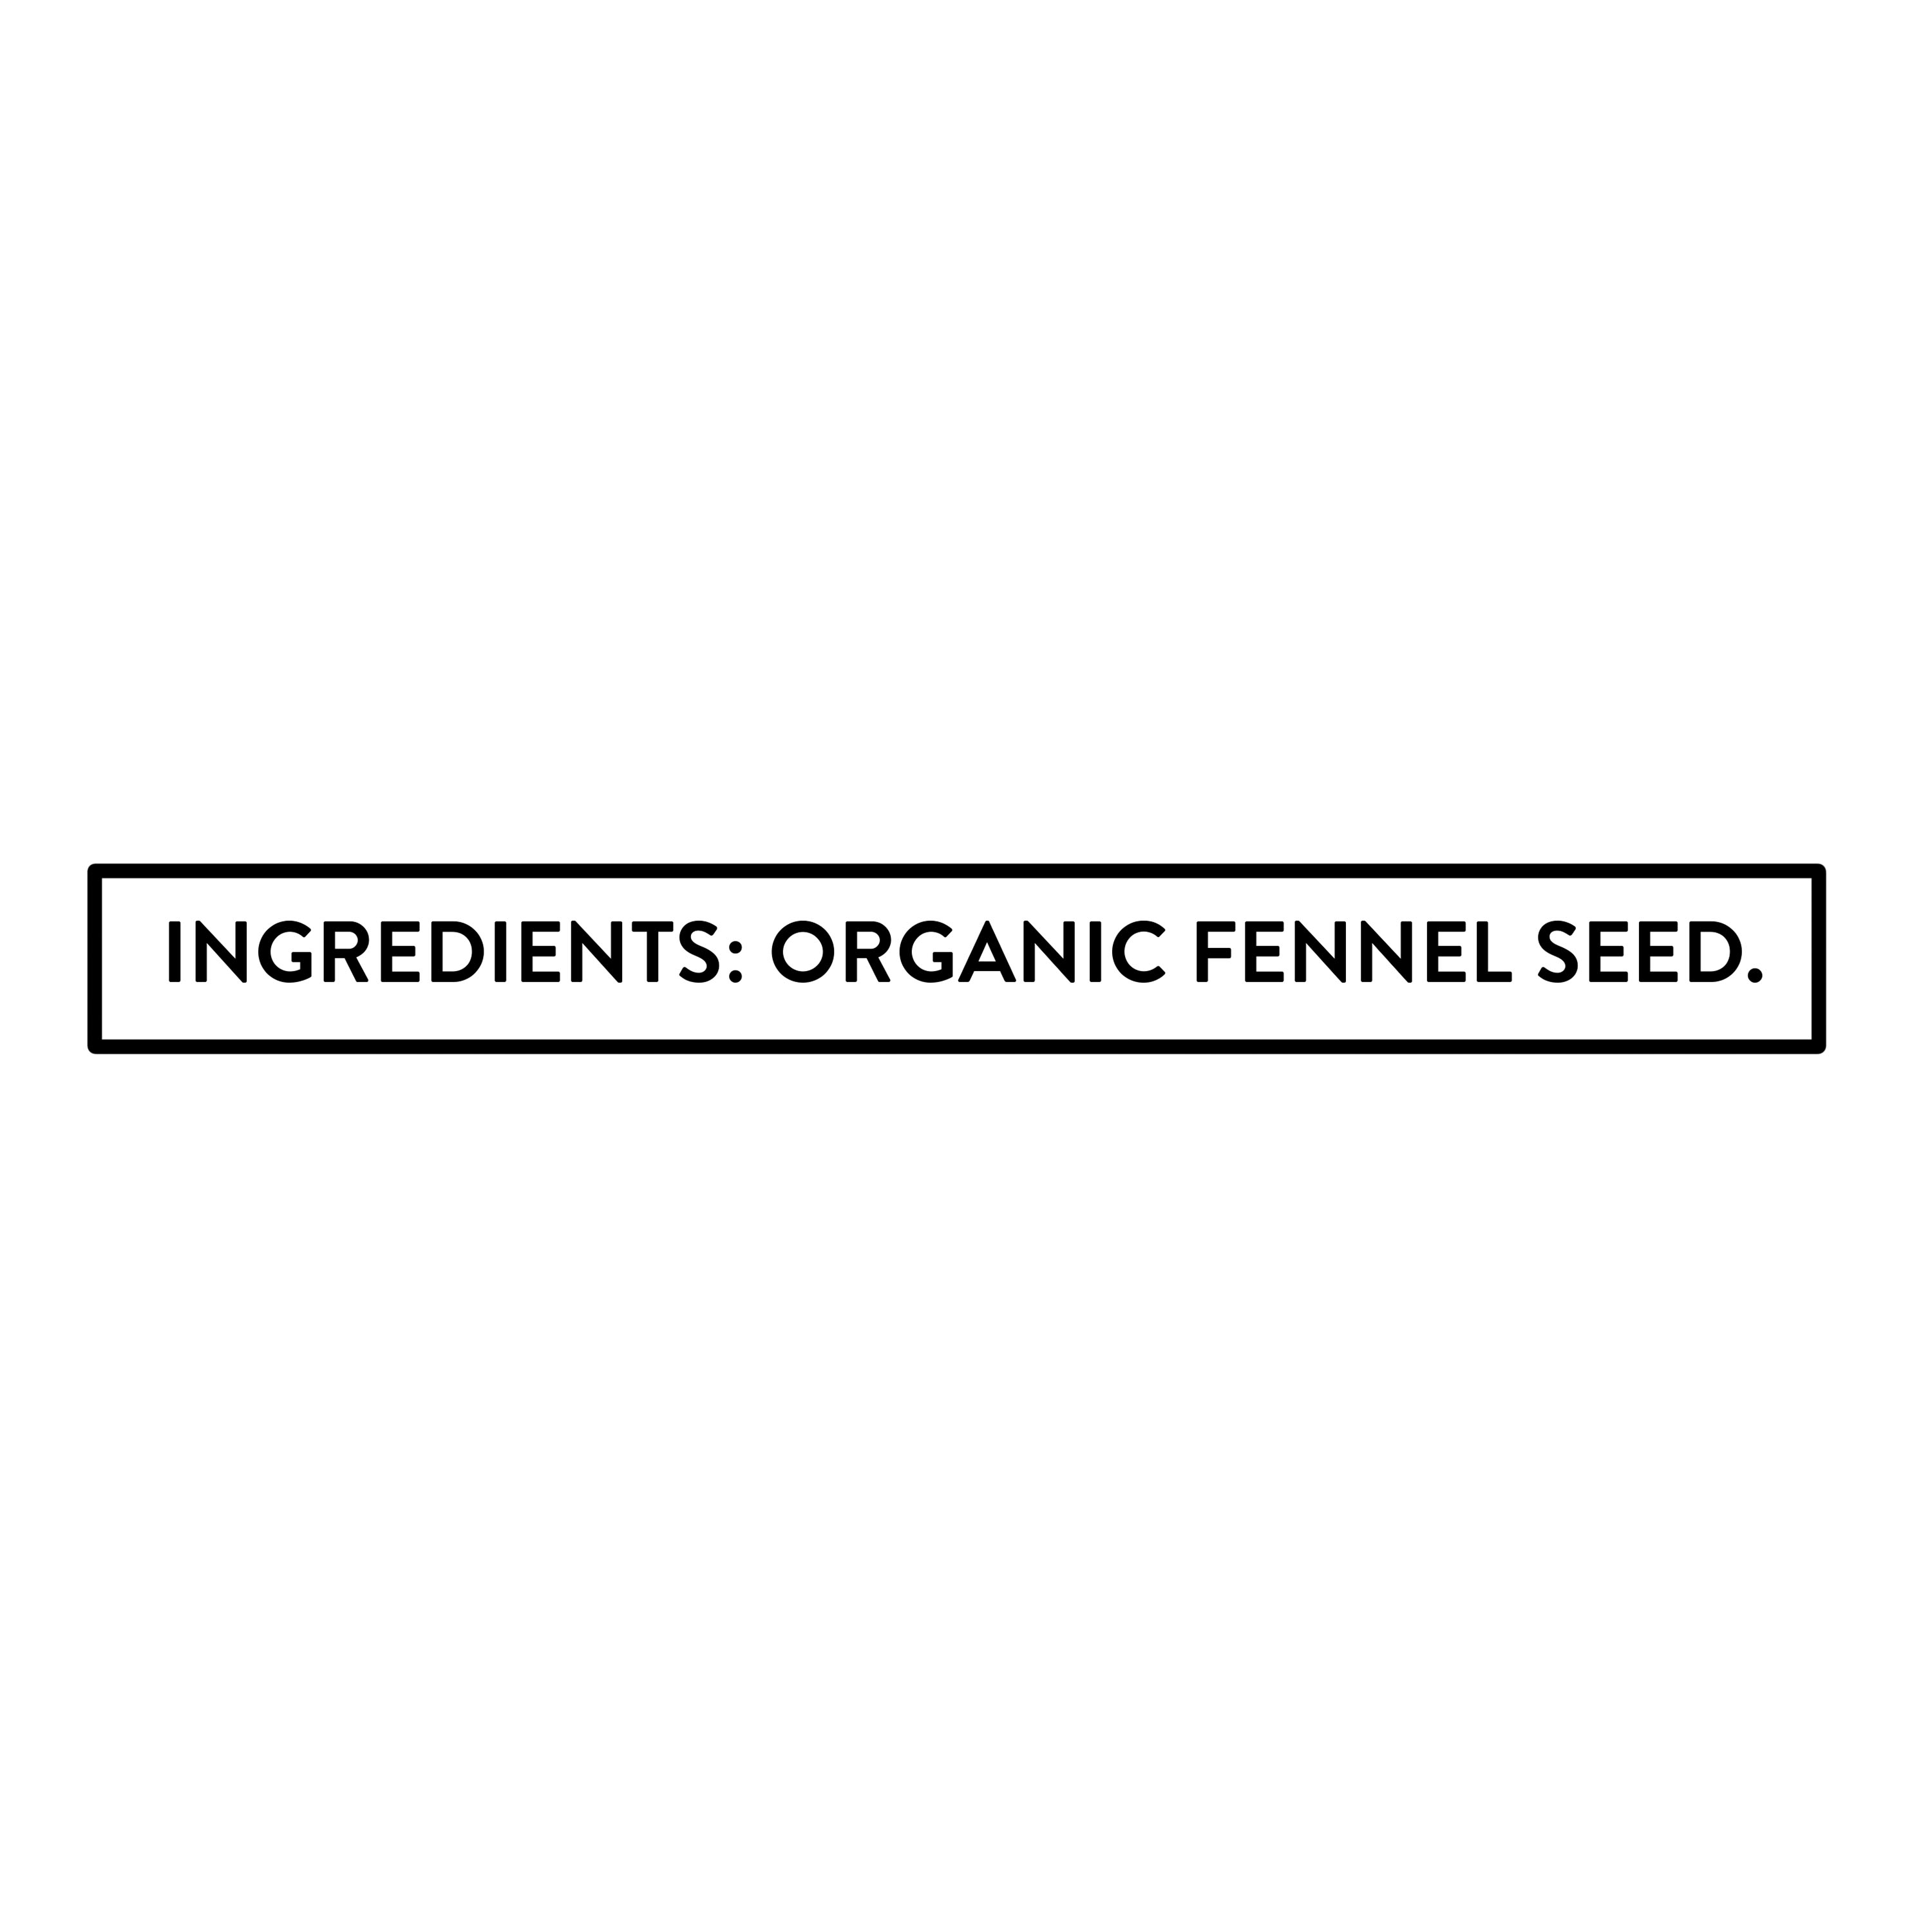 Great Value Organic Fennel Seed, 1.6 oz - image 5 of 7